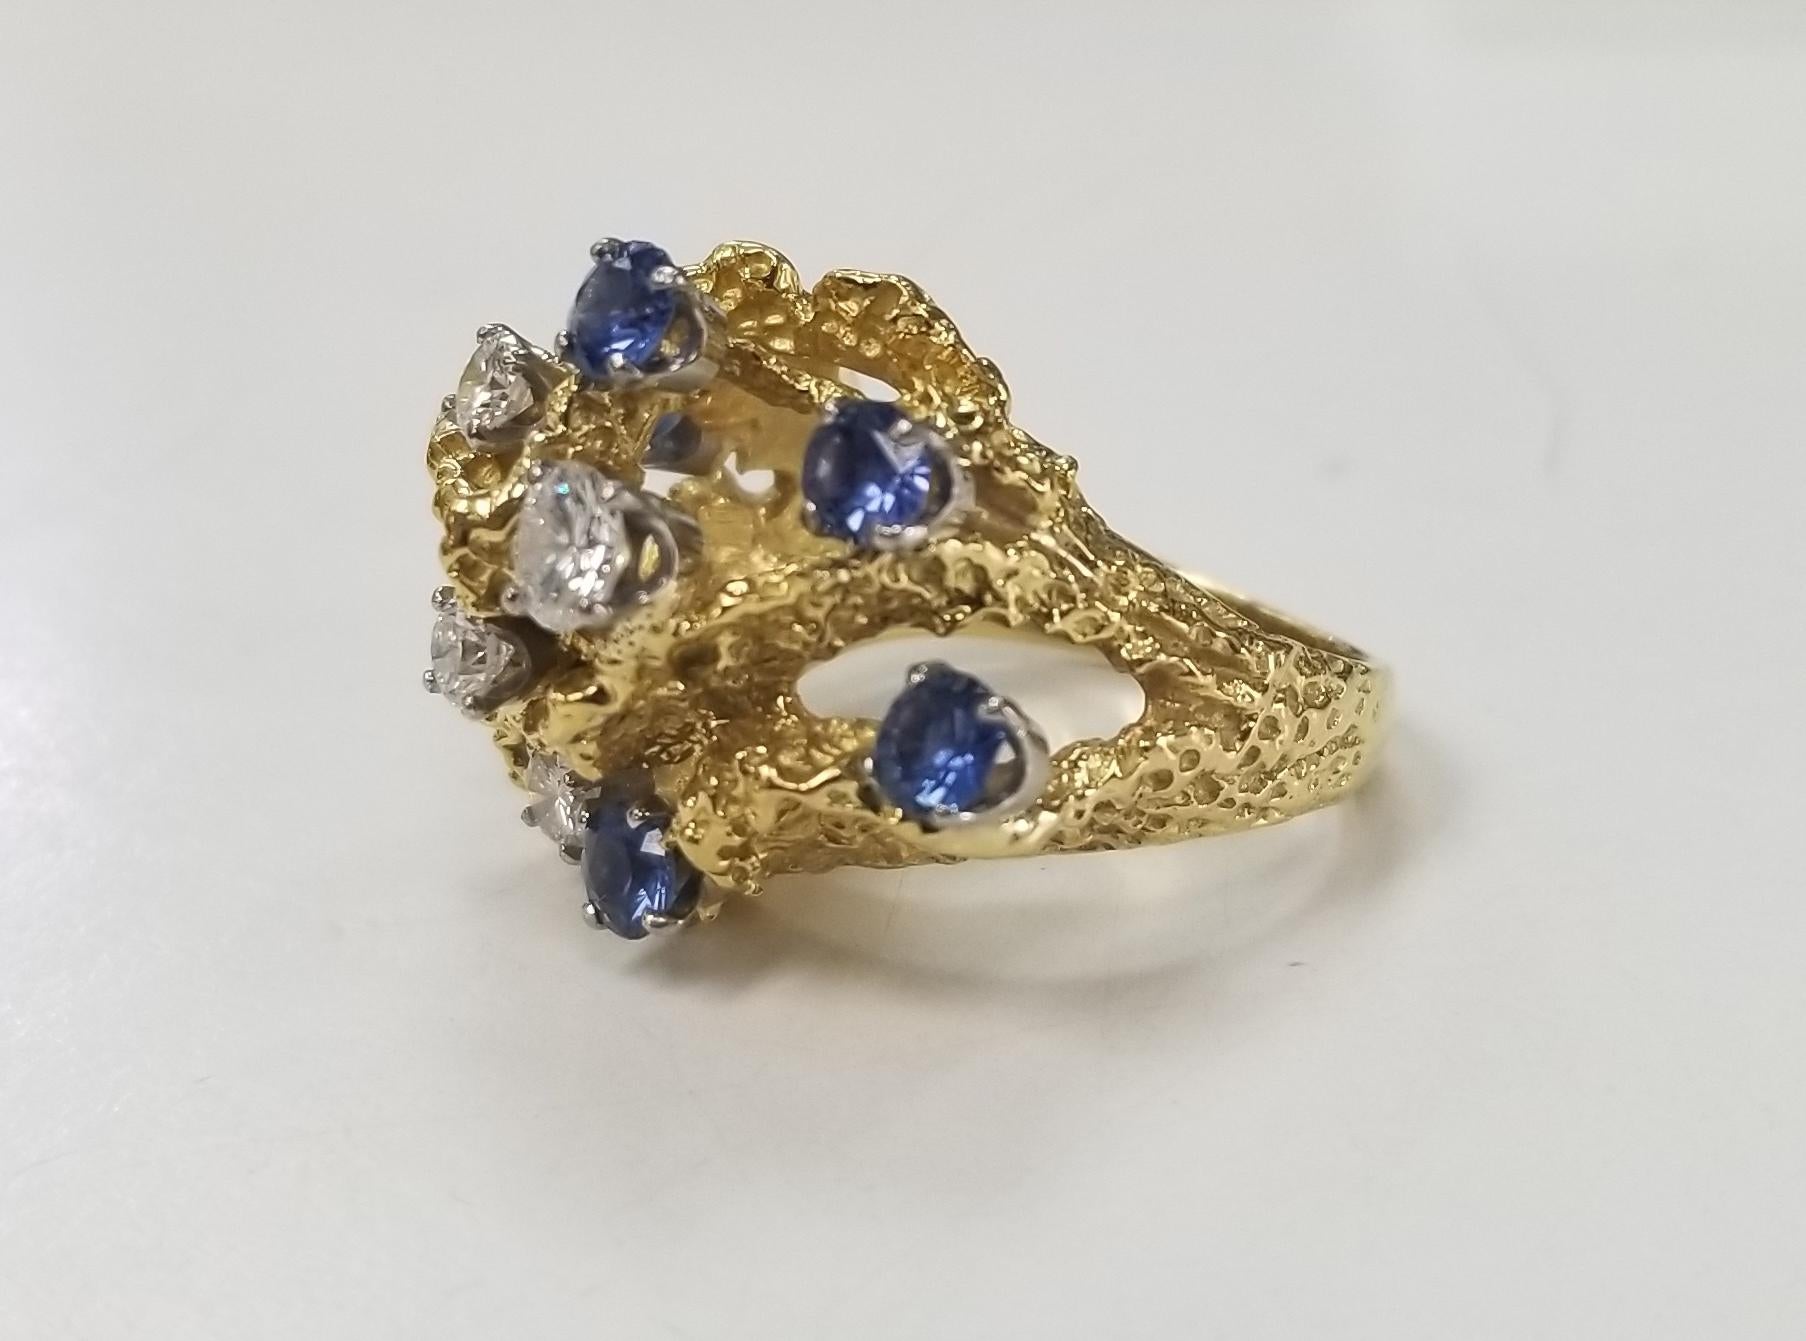 1950's 18k yellow gold diamond and sapphire free form ring, containing 5 round full cut diamonds of very fine quality weighing .60pts. and 6 round gem quality blue sapphires weighing 1.10ct.s  ring is a size 5.75 and can be sized to fit for free.